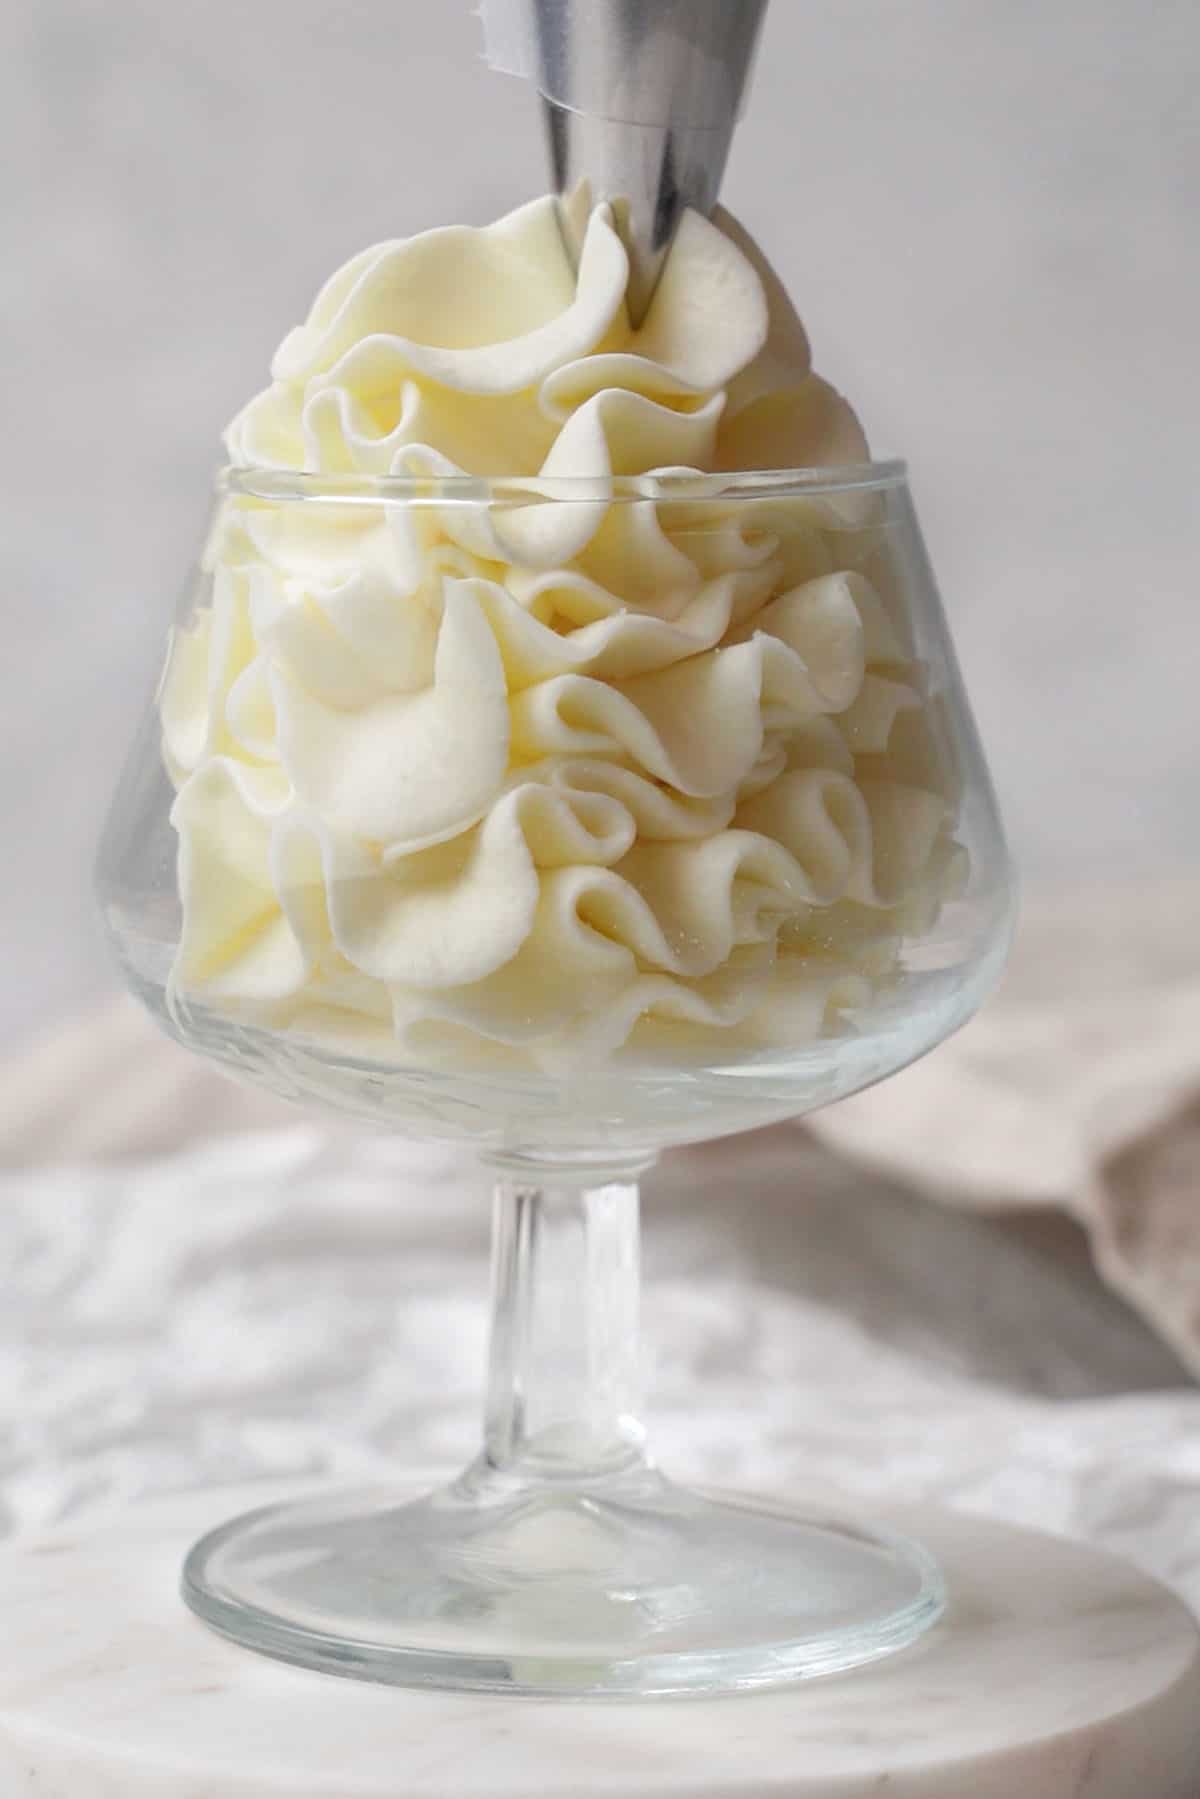 cream cheese frosting piping into a glass.